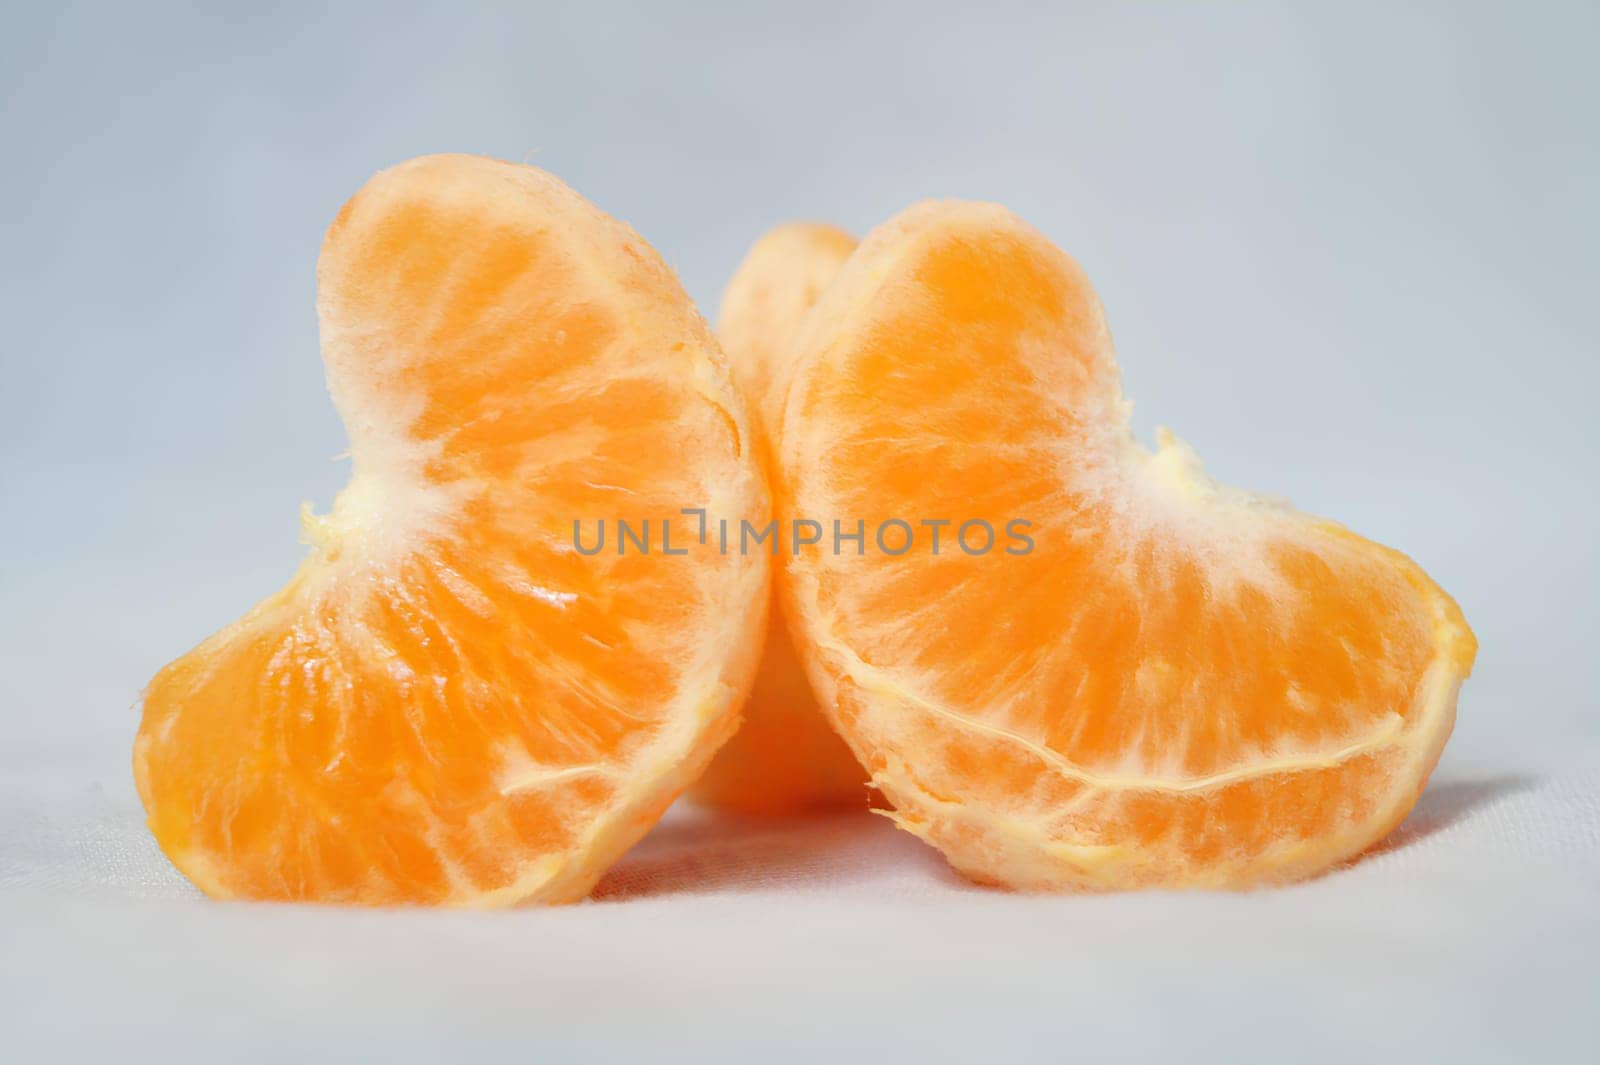 A close up of an orange with the top half cut off. High quality photo